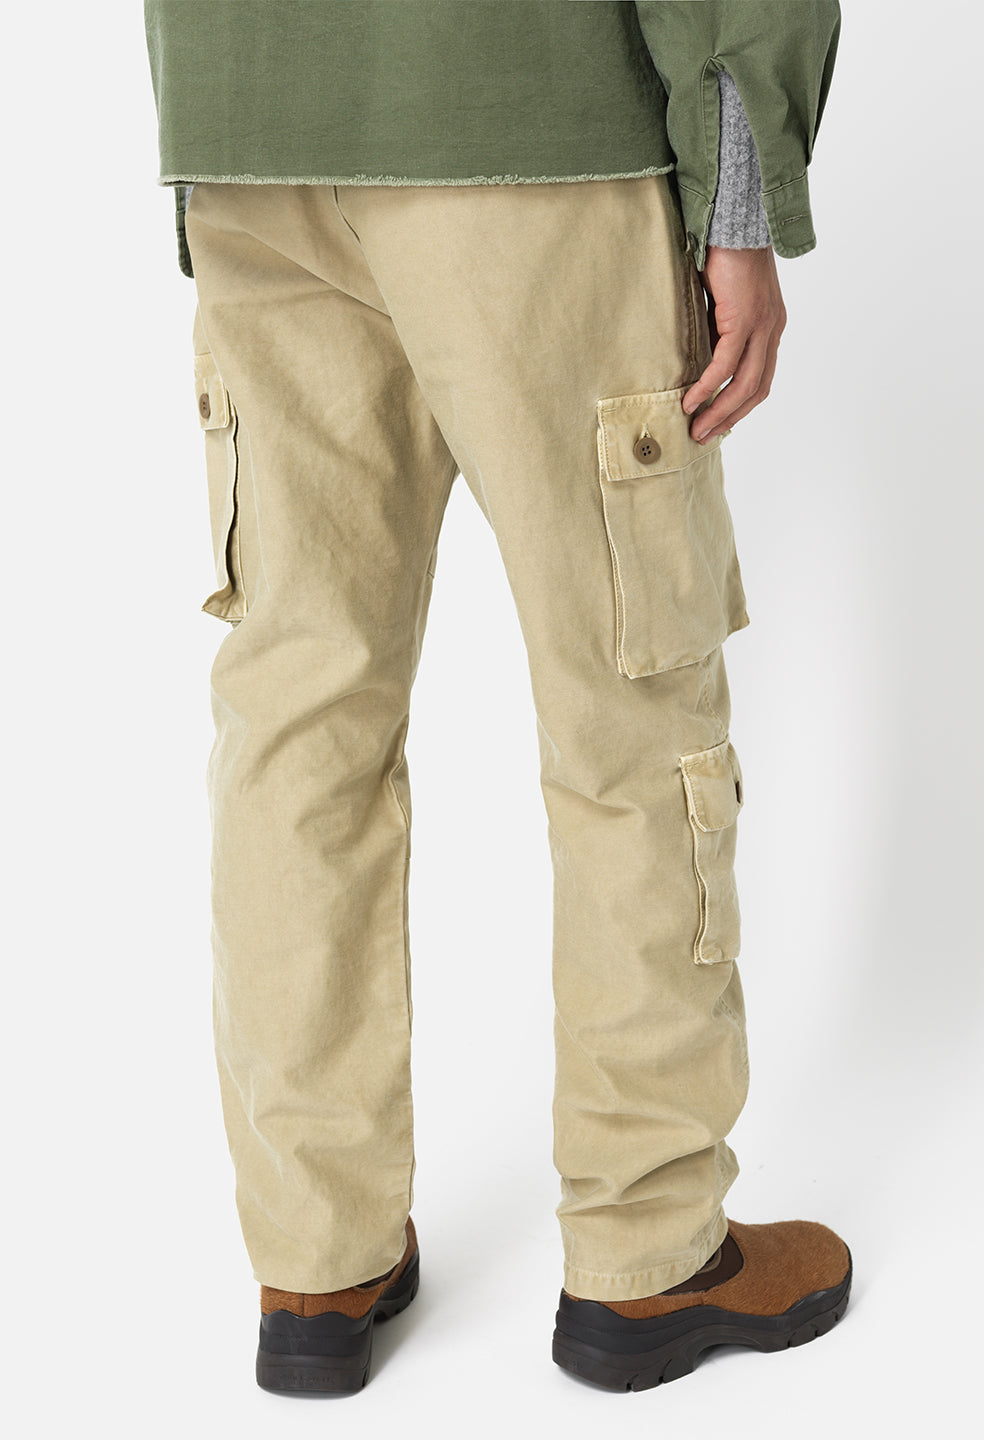 TOM FORD Tapered stretch-cotton twill cargo pants | NET-A-PORTER